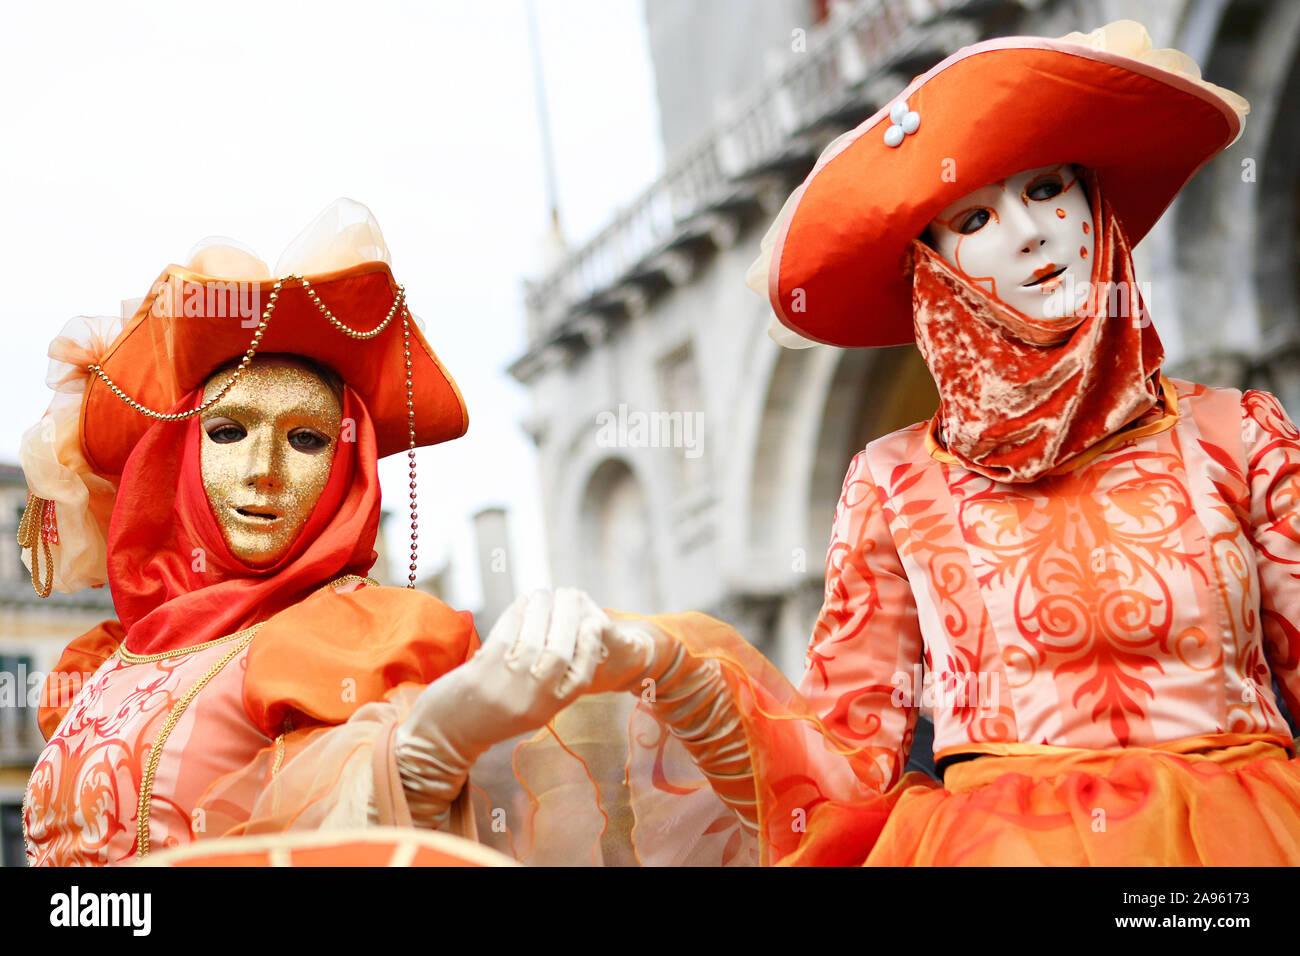 Photos Costumes Carnaval Venise 2016, page 20